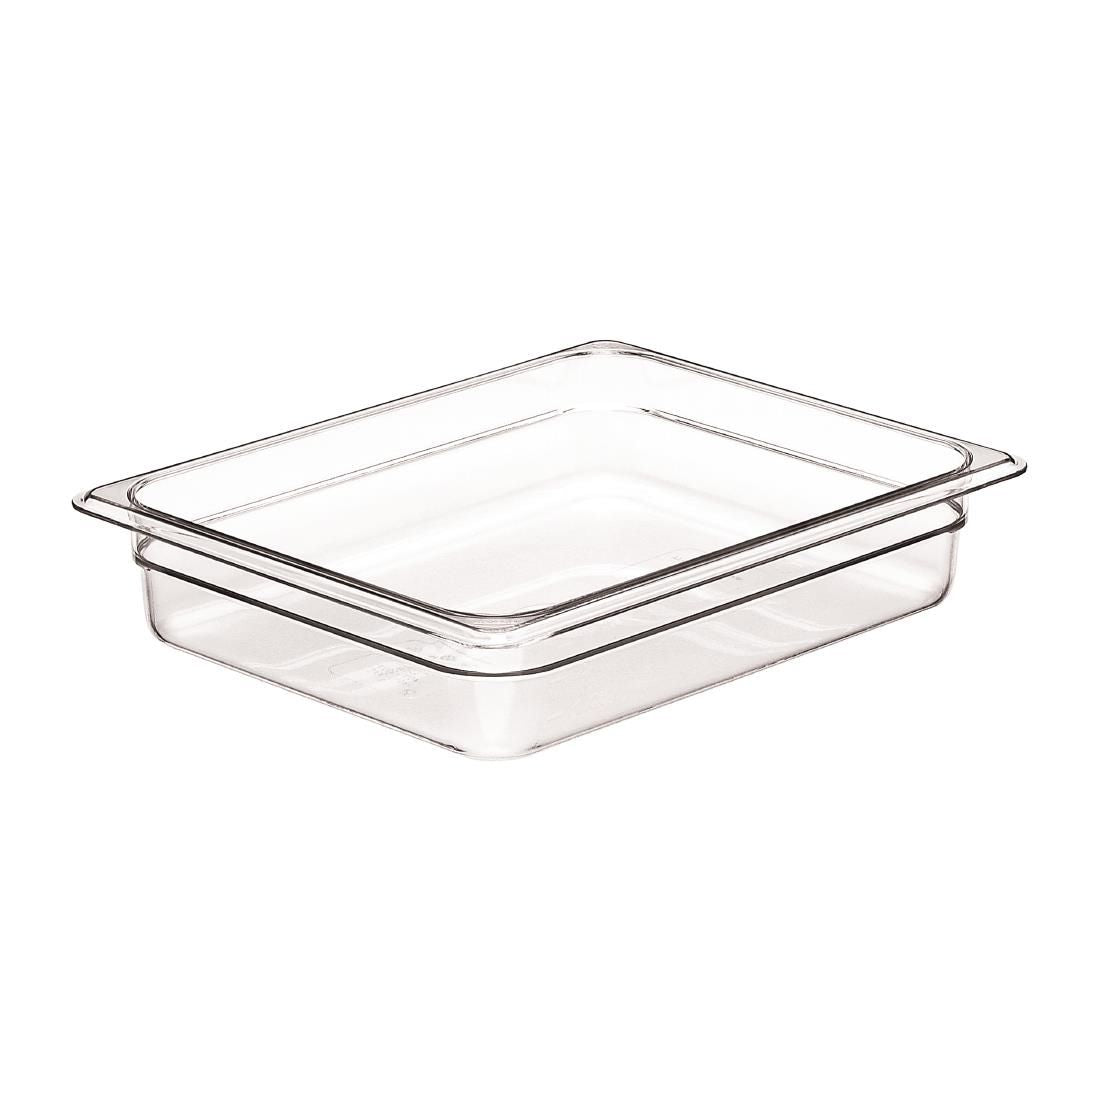 DM730 Cambro Polycarbonate 1/2 Gastronorm Pan 65mm JD Catering Equipment Solutions Ltd